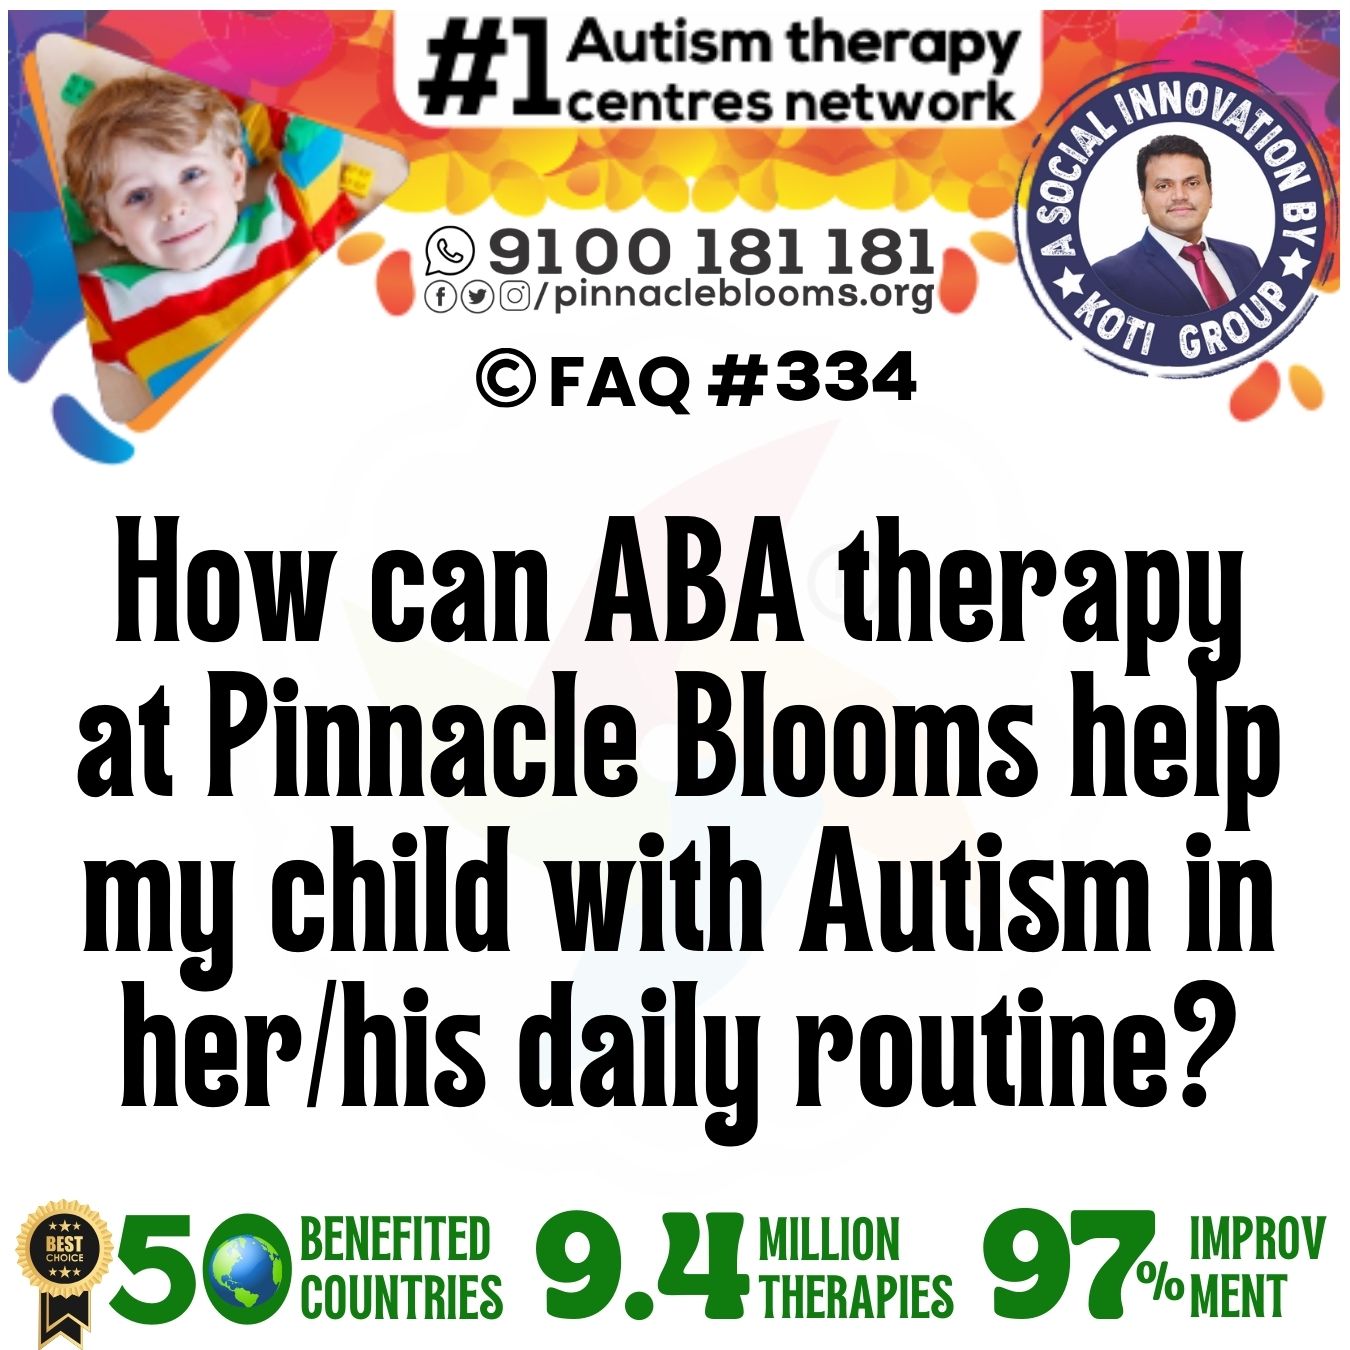 How can ABA therapy at Pinnacle Blooms help my child with Autism in her/his daily routine?